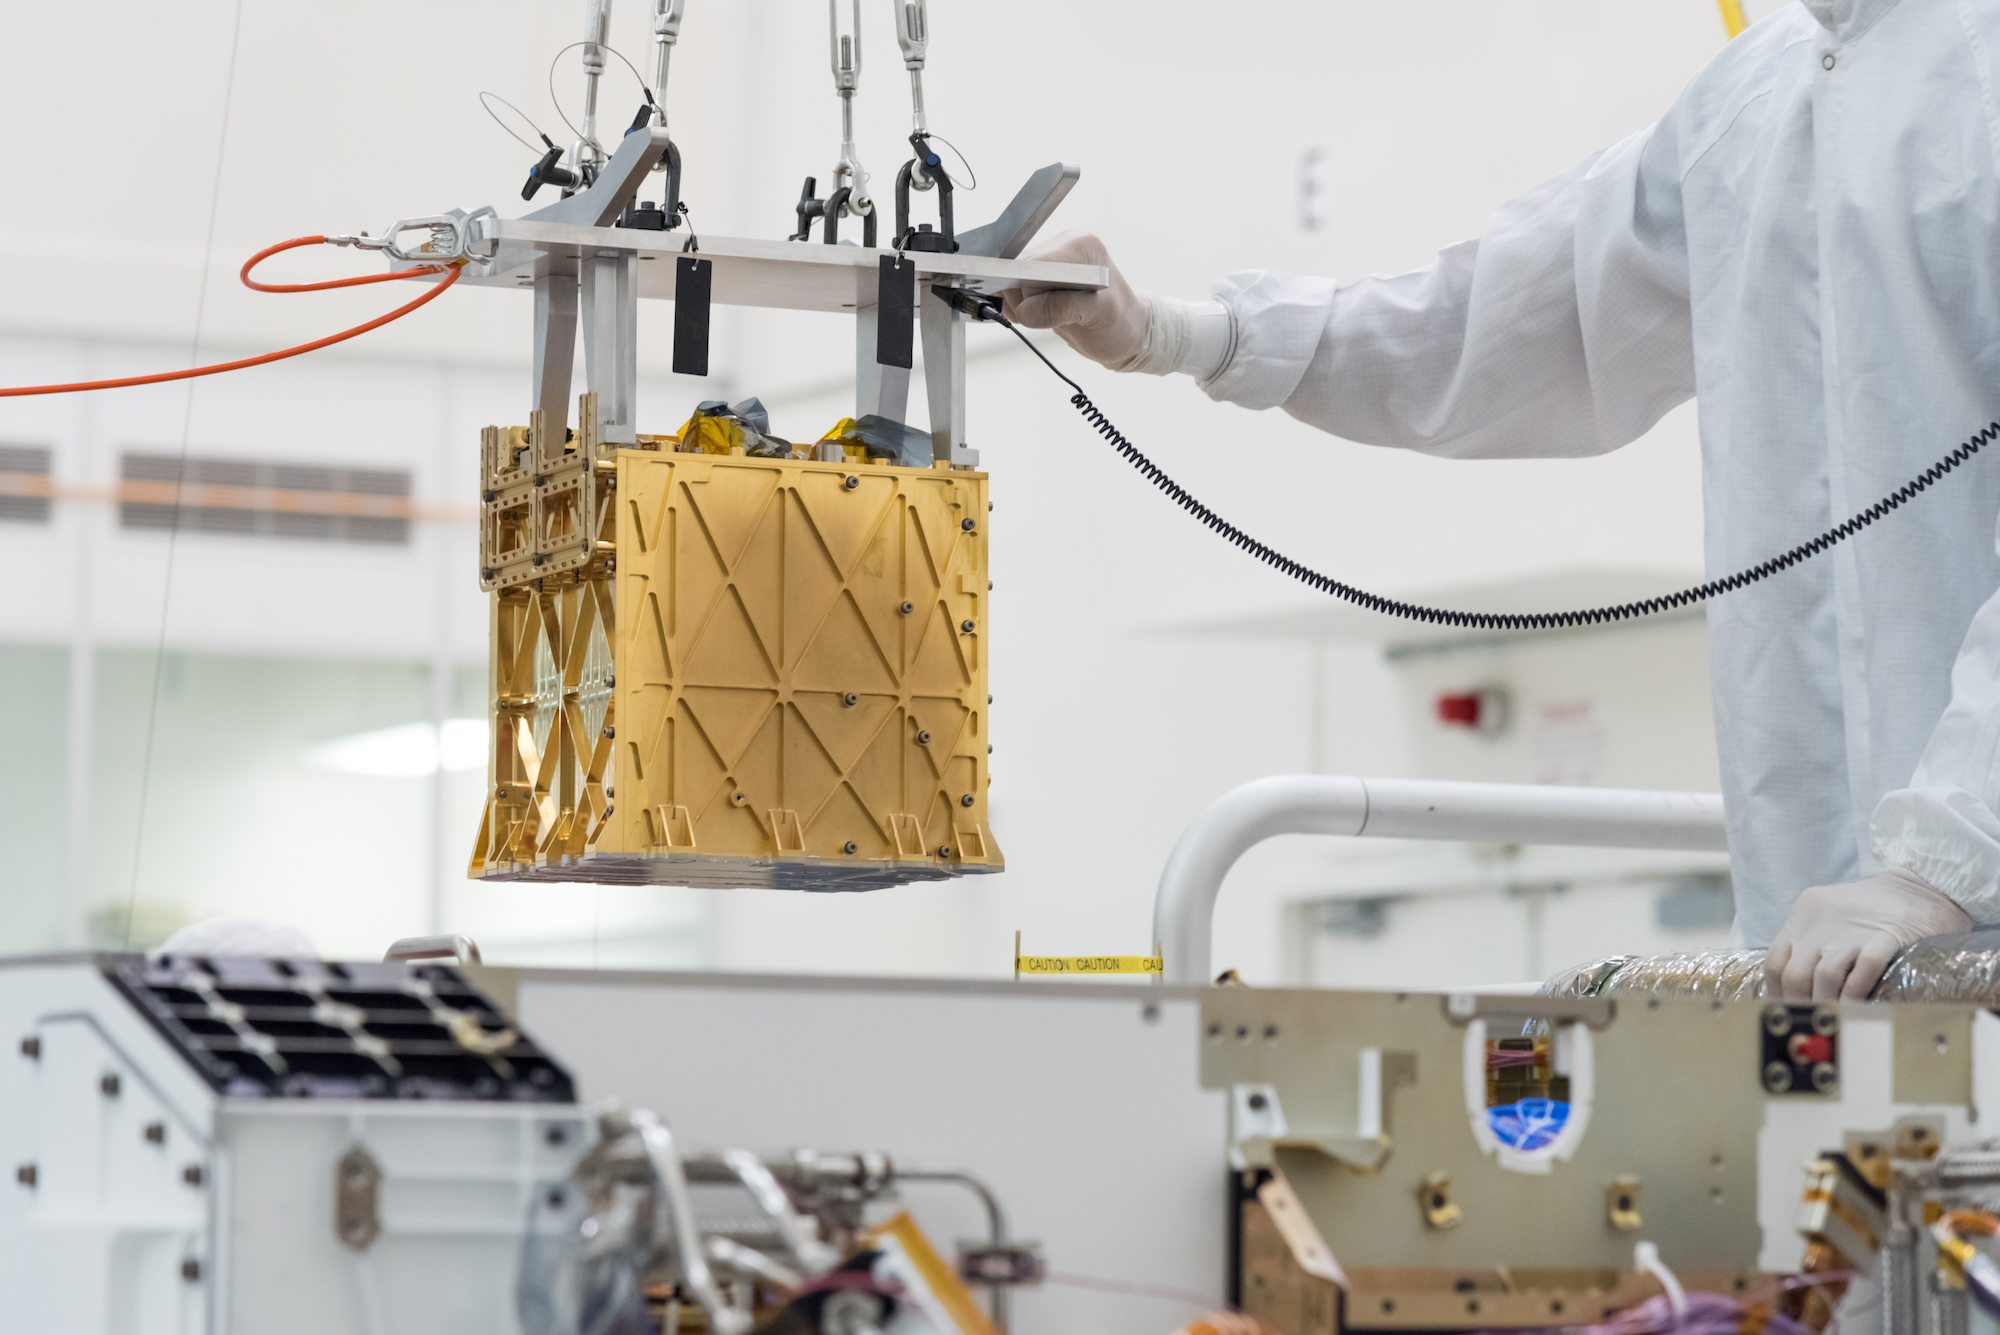 A golden metal cube is lifted by a person in a clean white suit in a laboratory